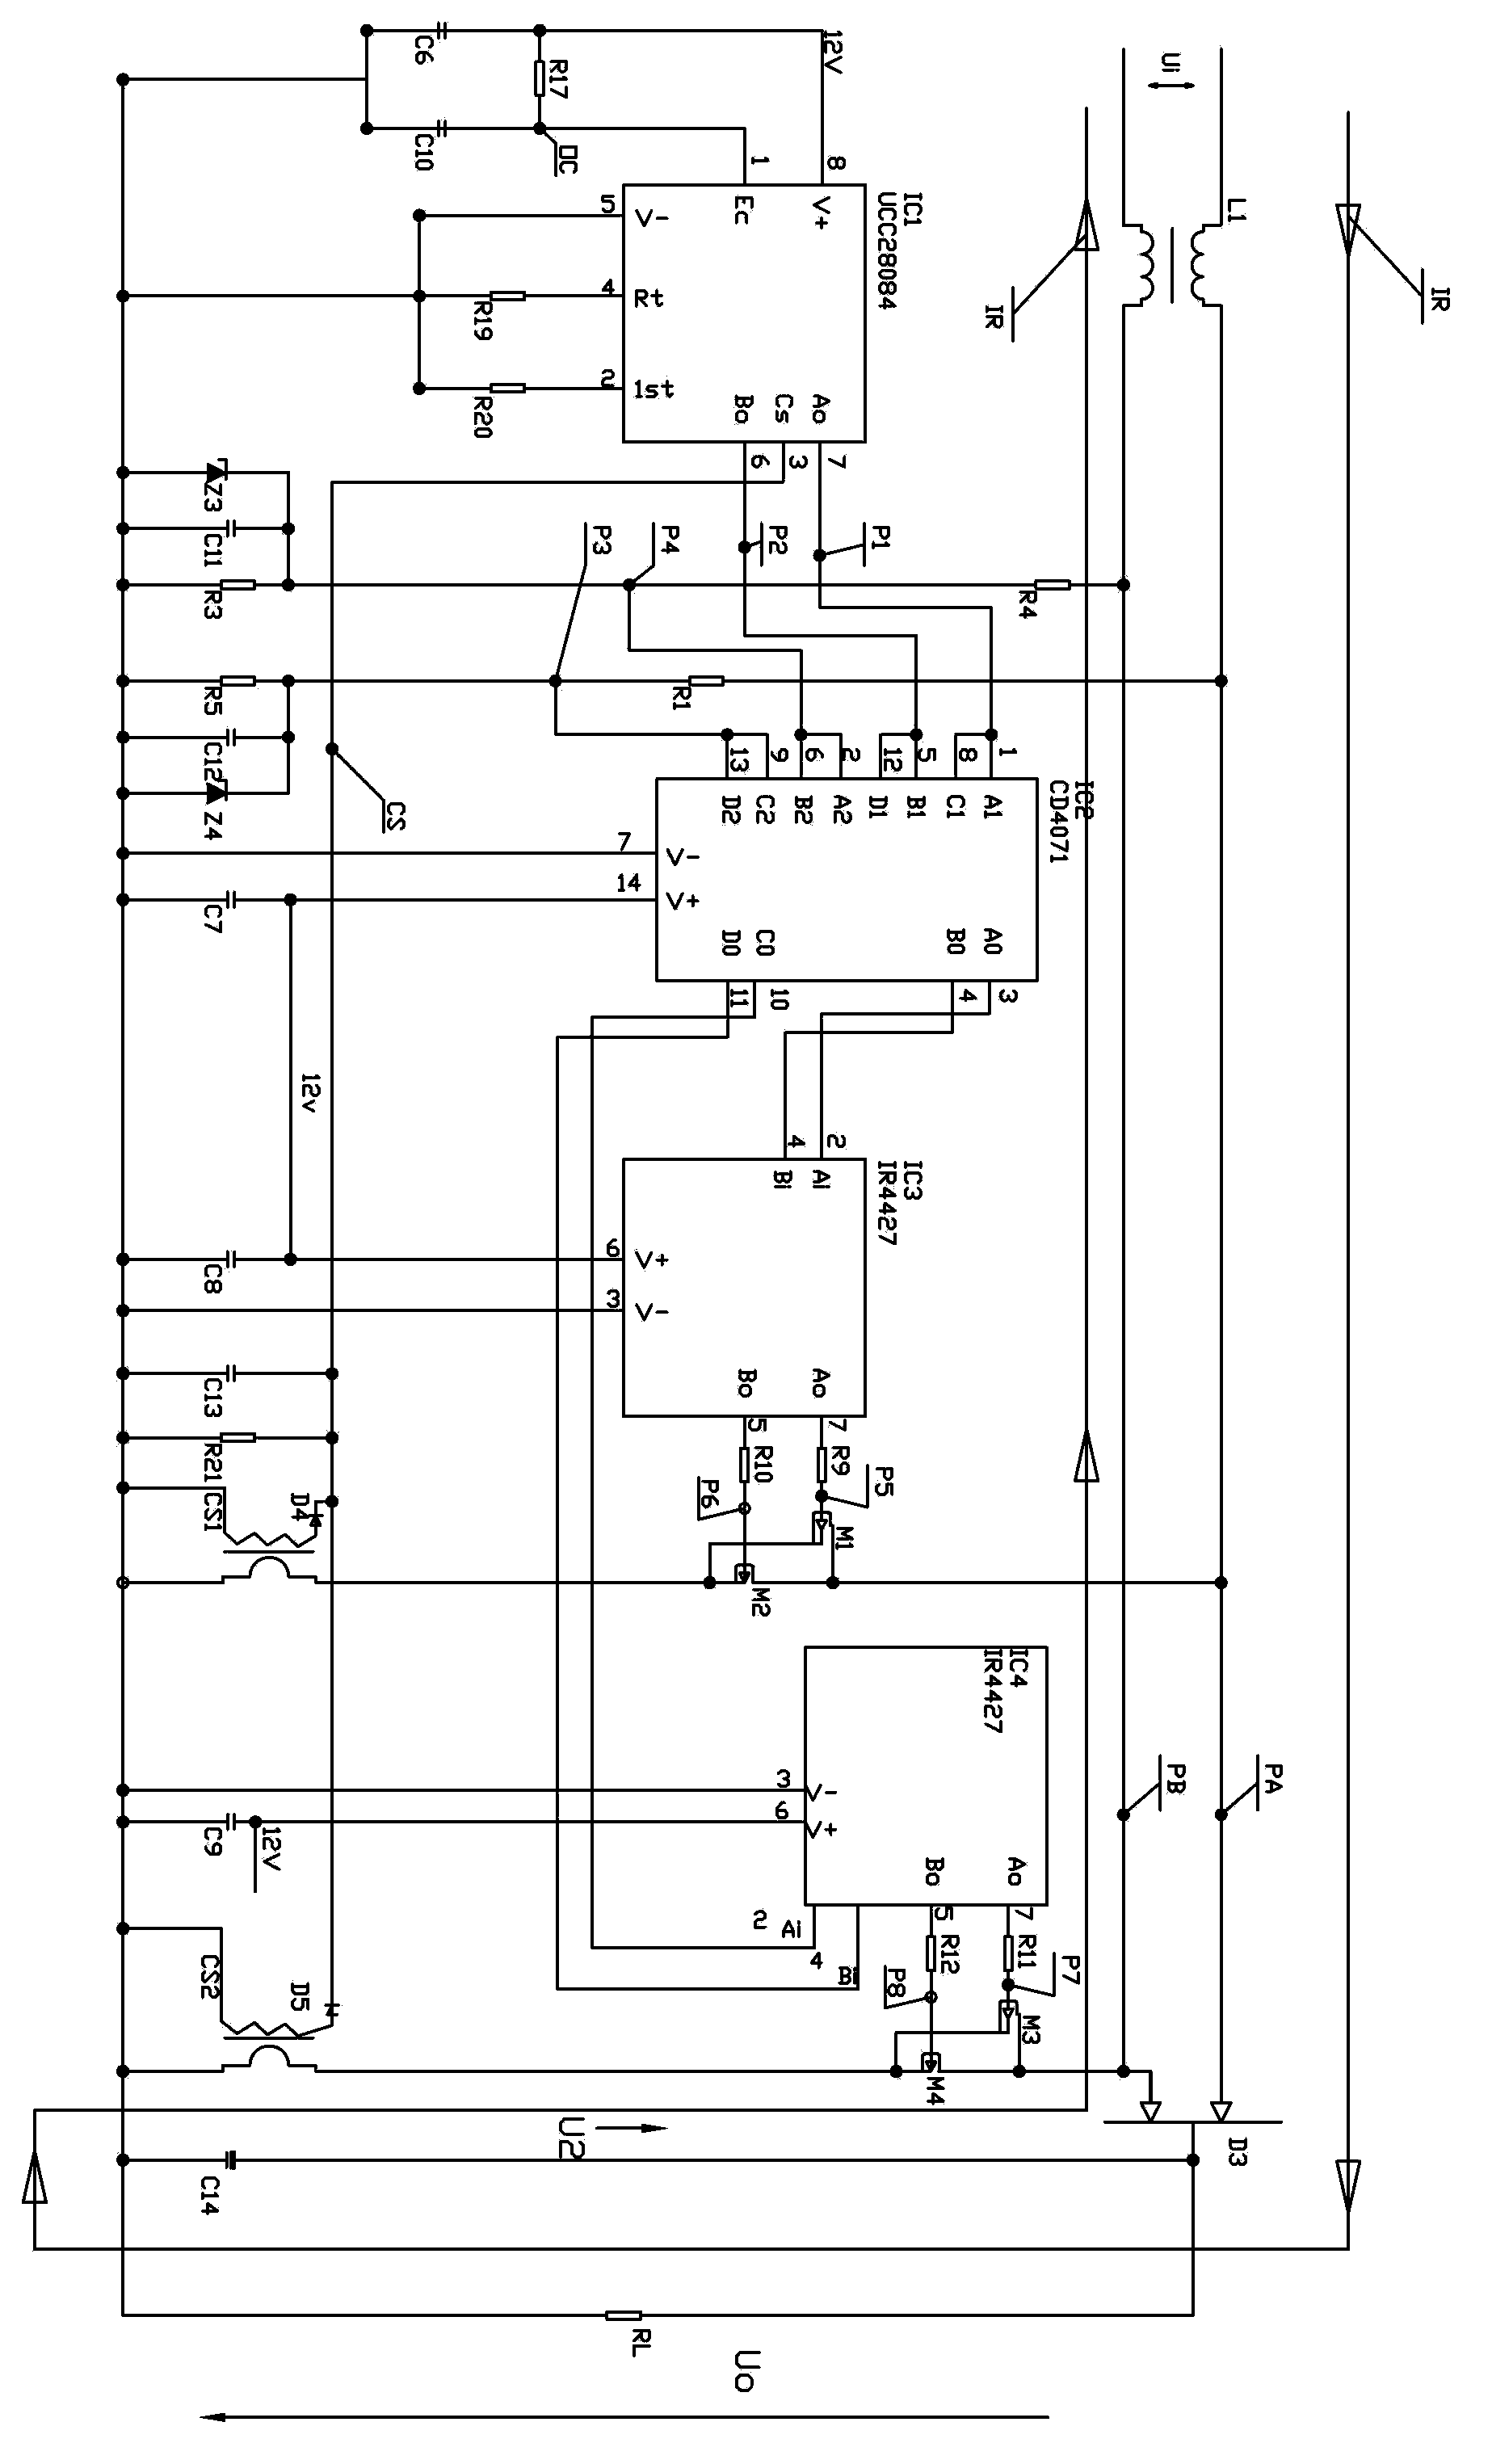 PWM control conduction XC/DC circuit for LED